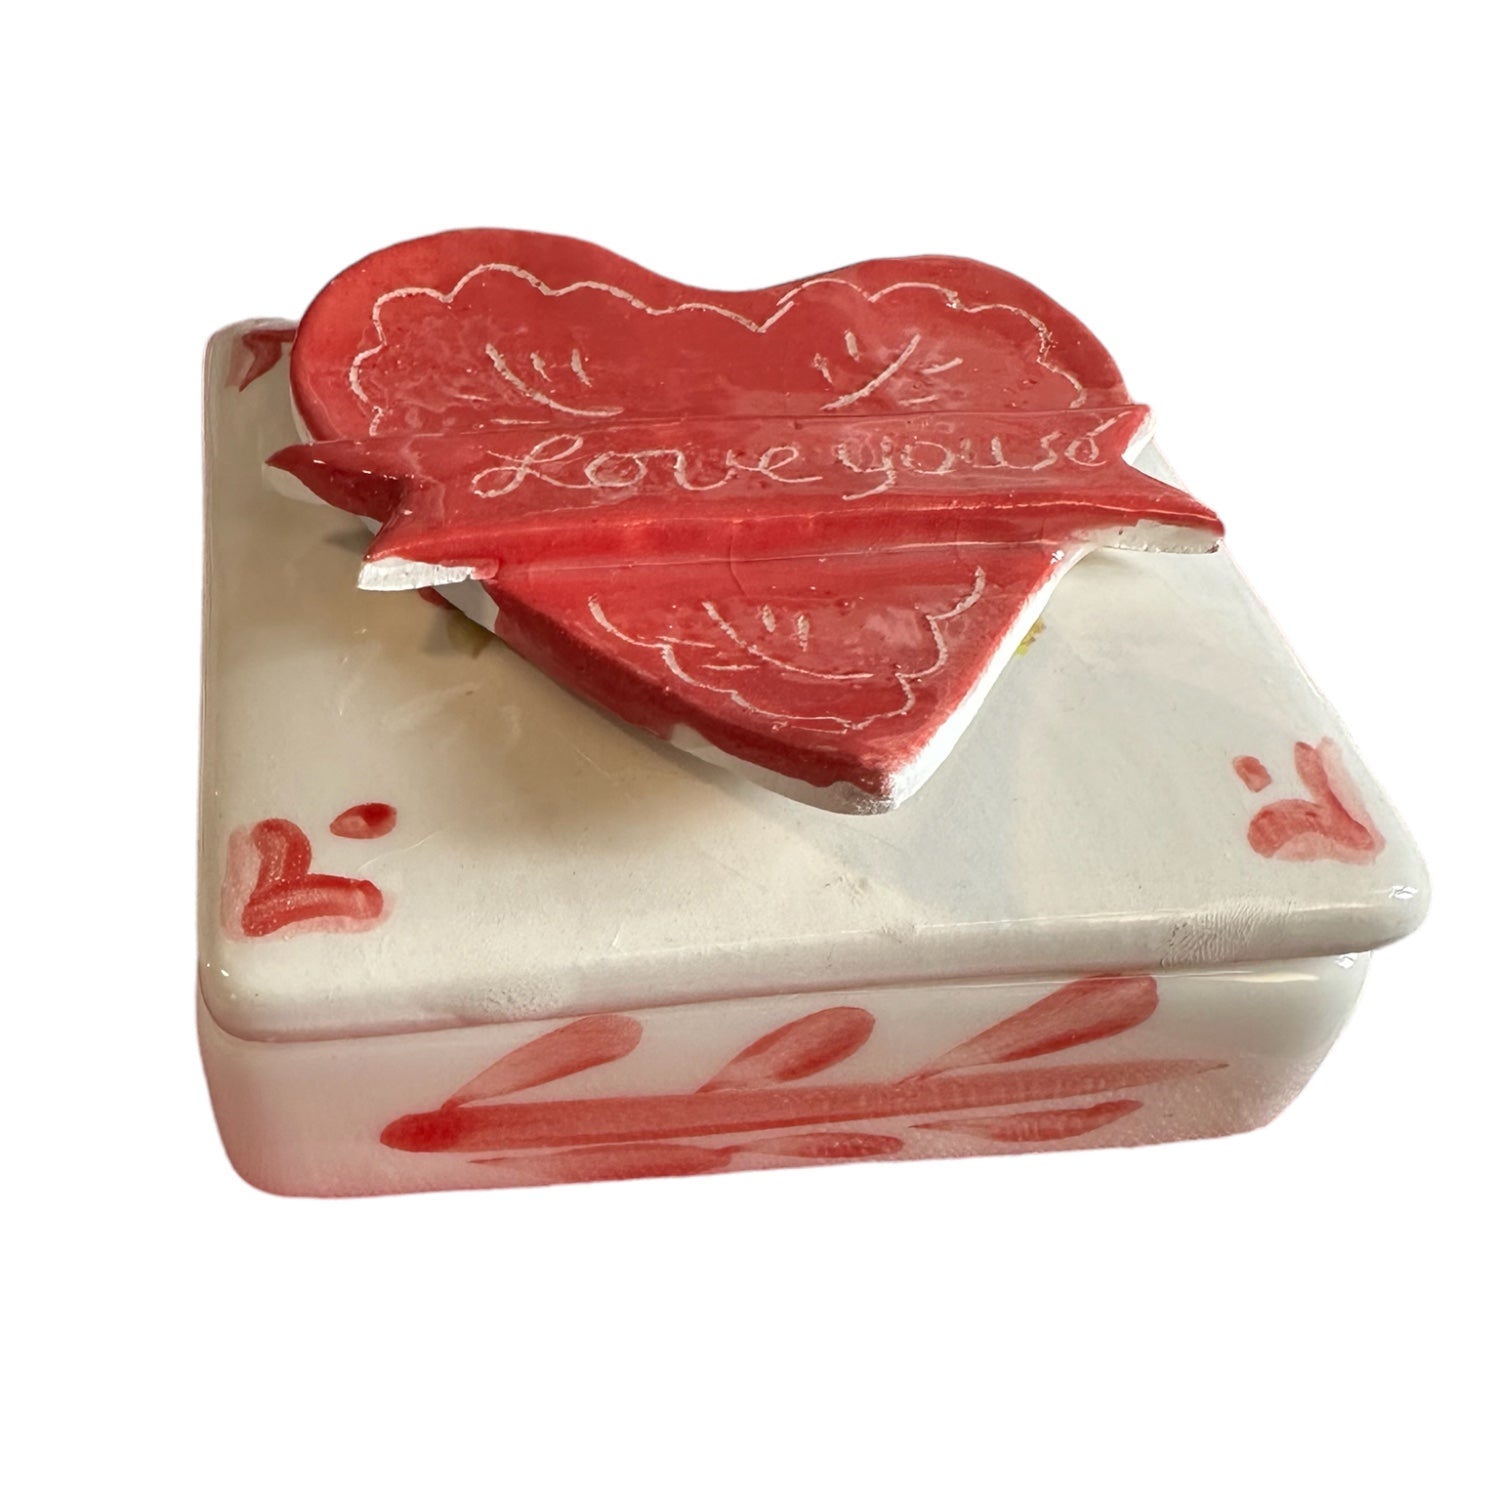 Trinket Box - Love You So - Premium  from Tricia Lowenfield Design 